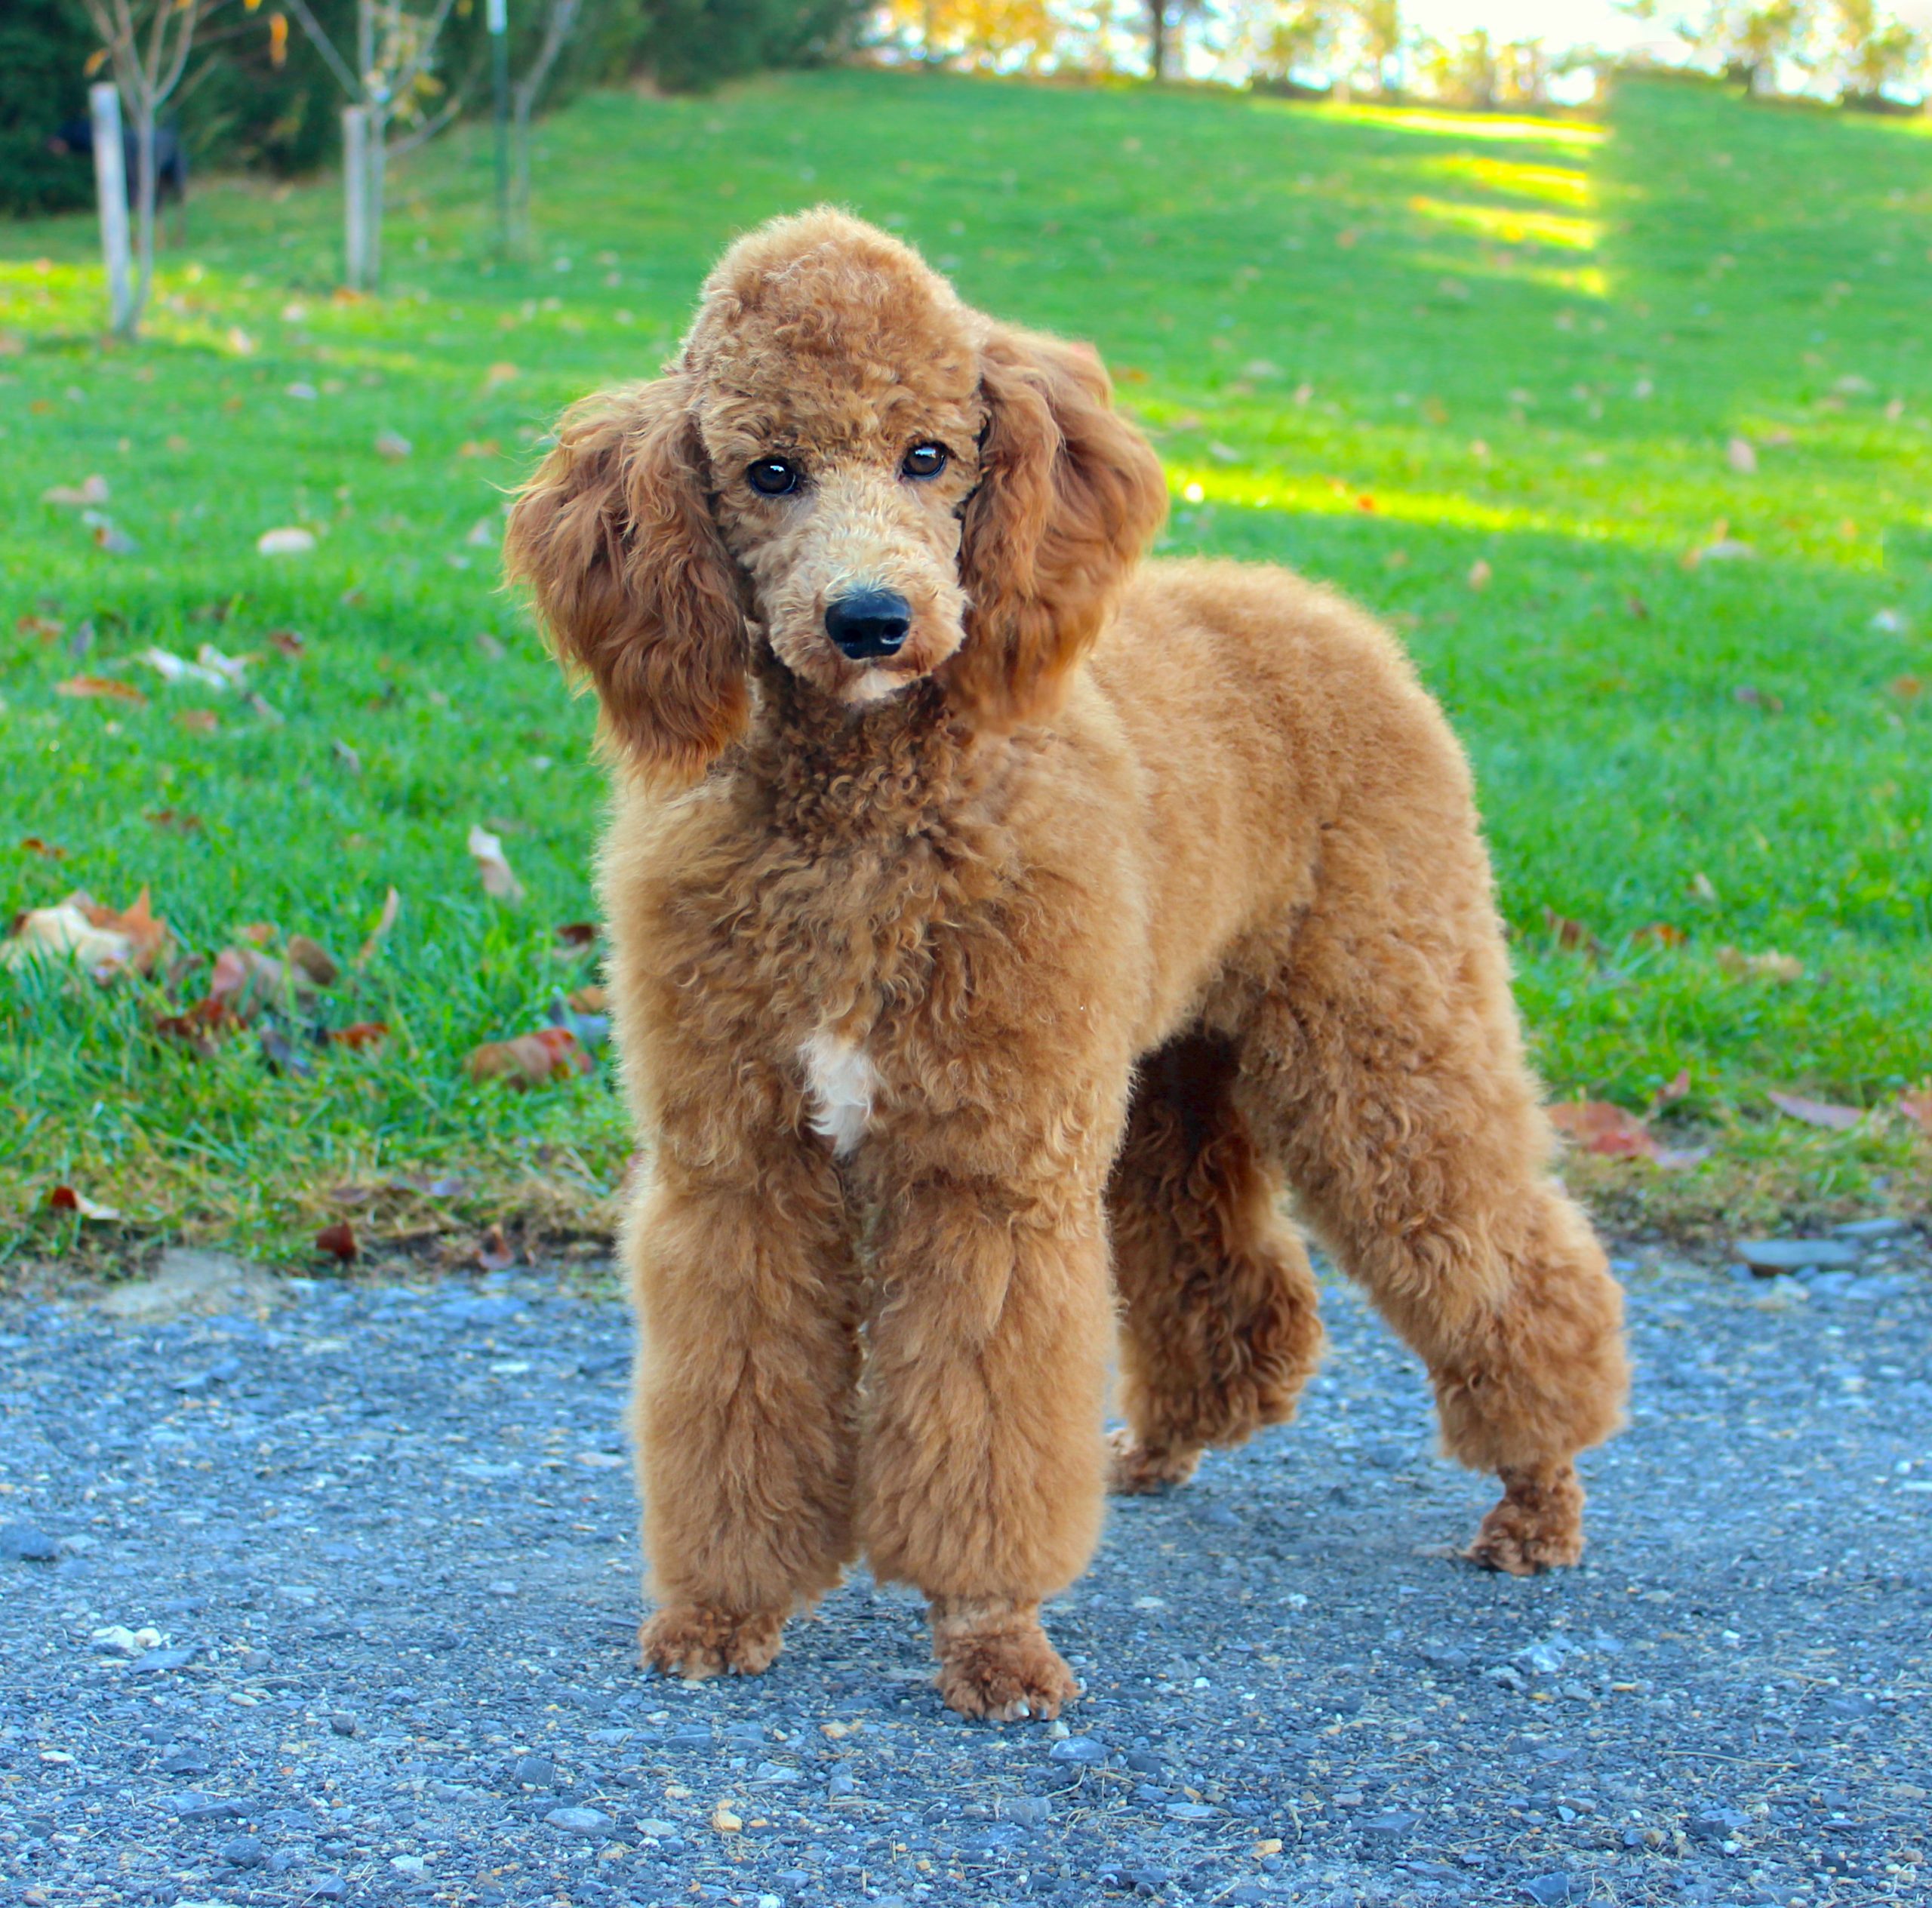 AKC-dark-red-Miniature-Poodle-standing-in-green-grass